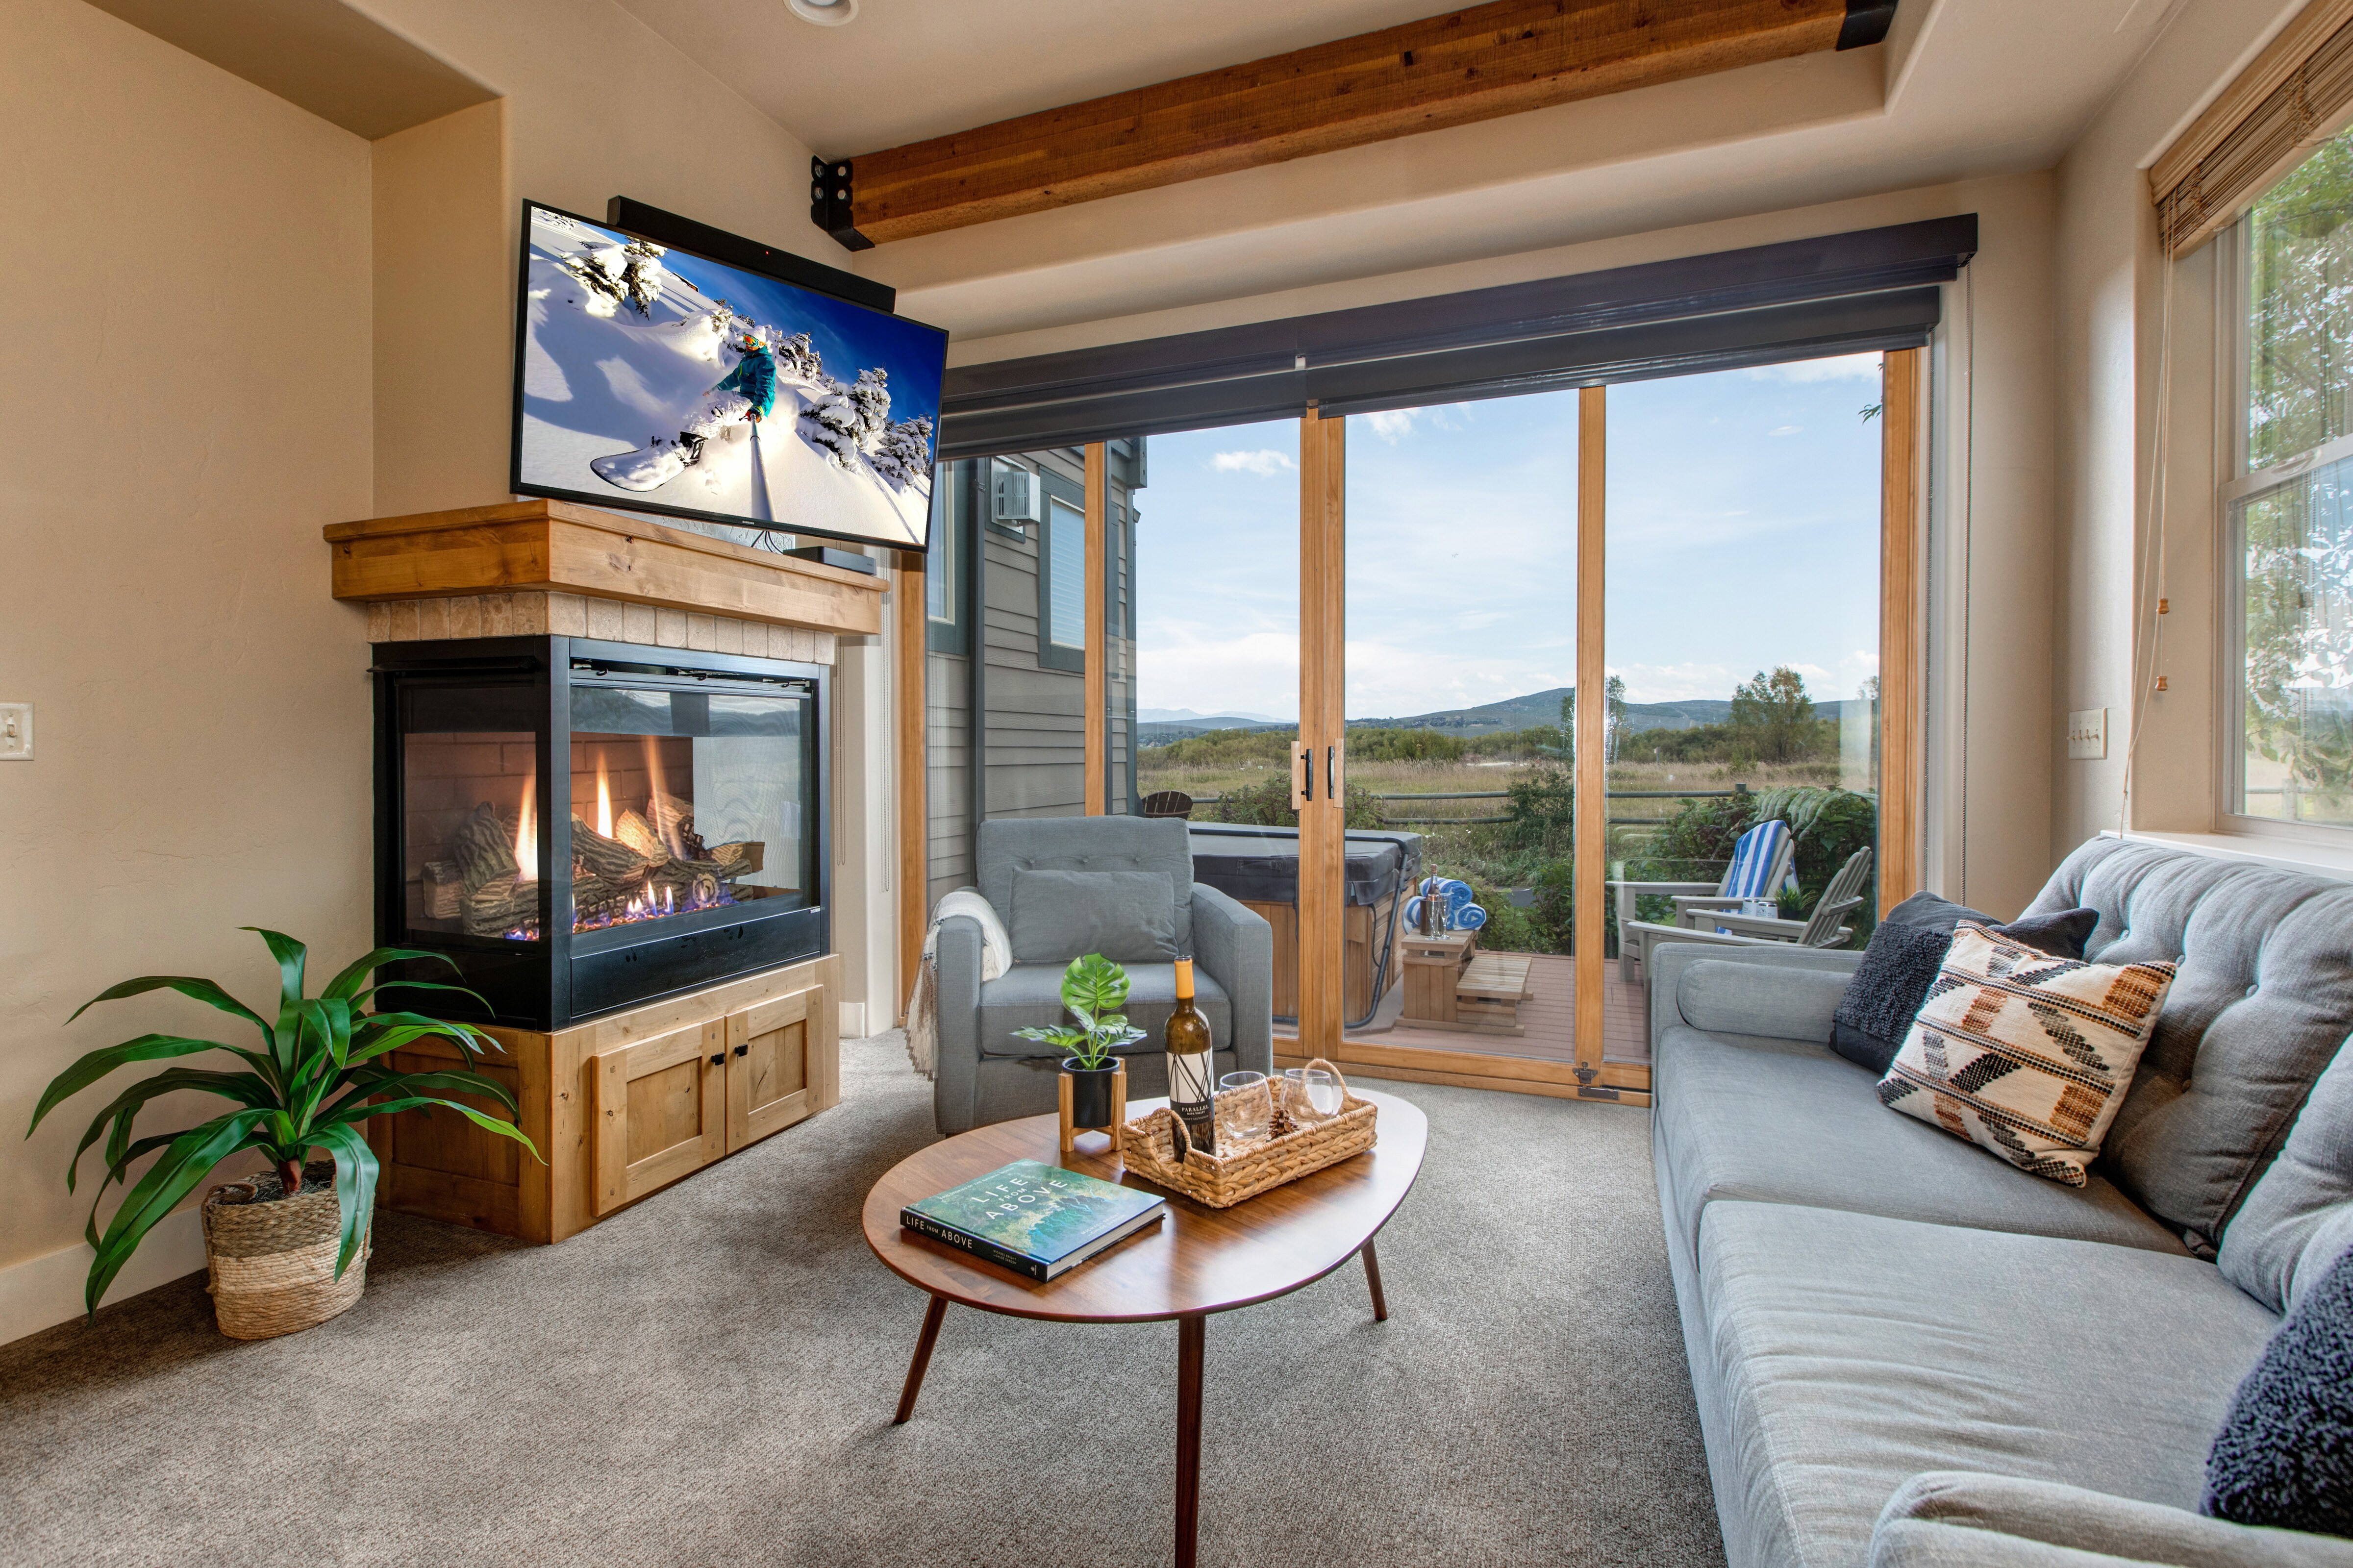 Living Room with plush couch, armchair, gas fireplace, 50" TV, and private hot tub patio access